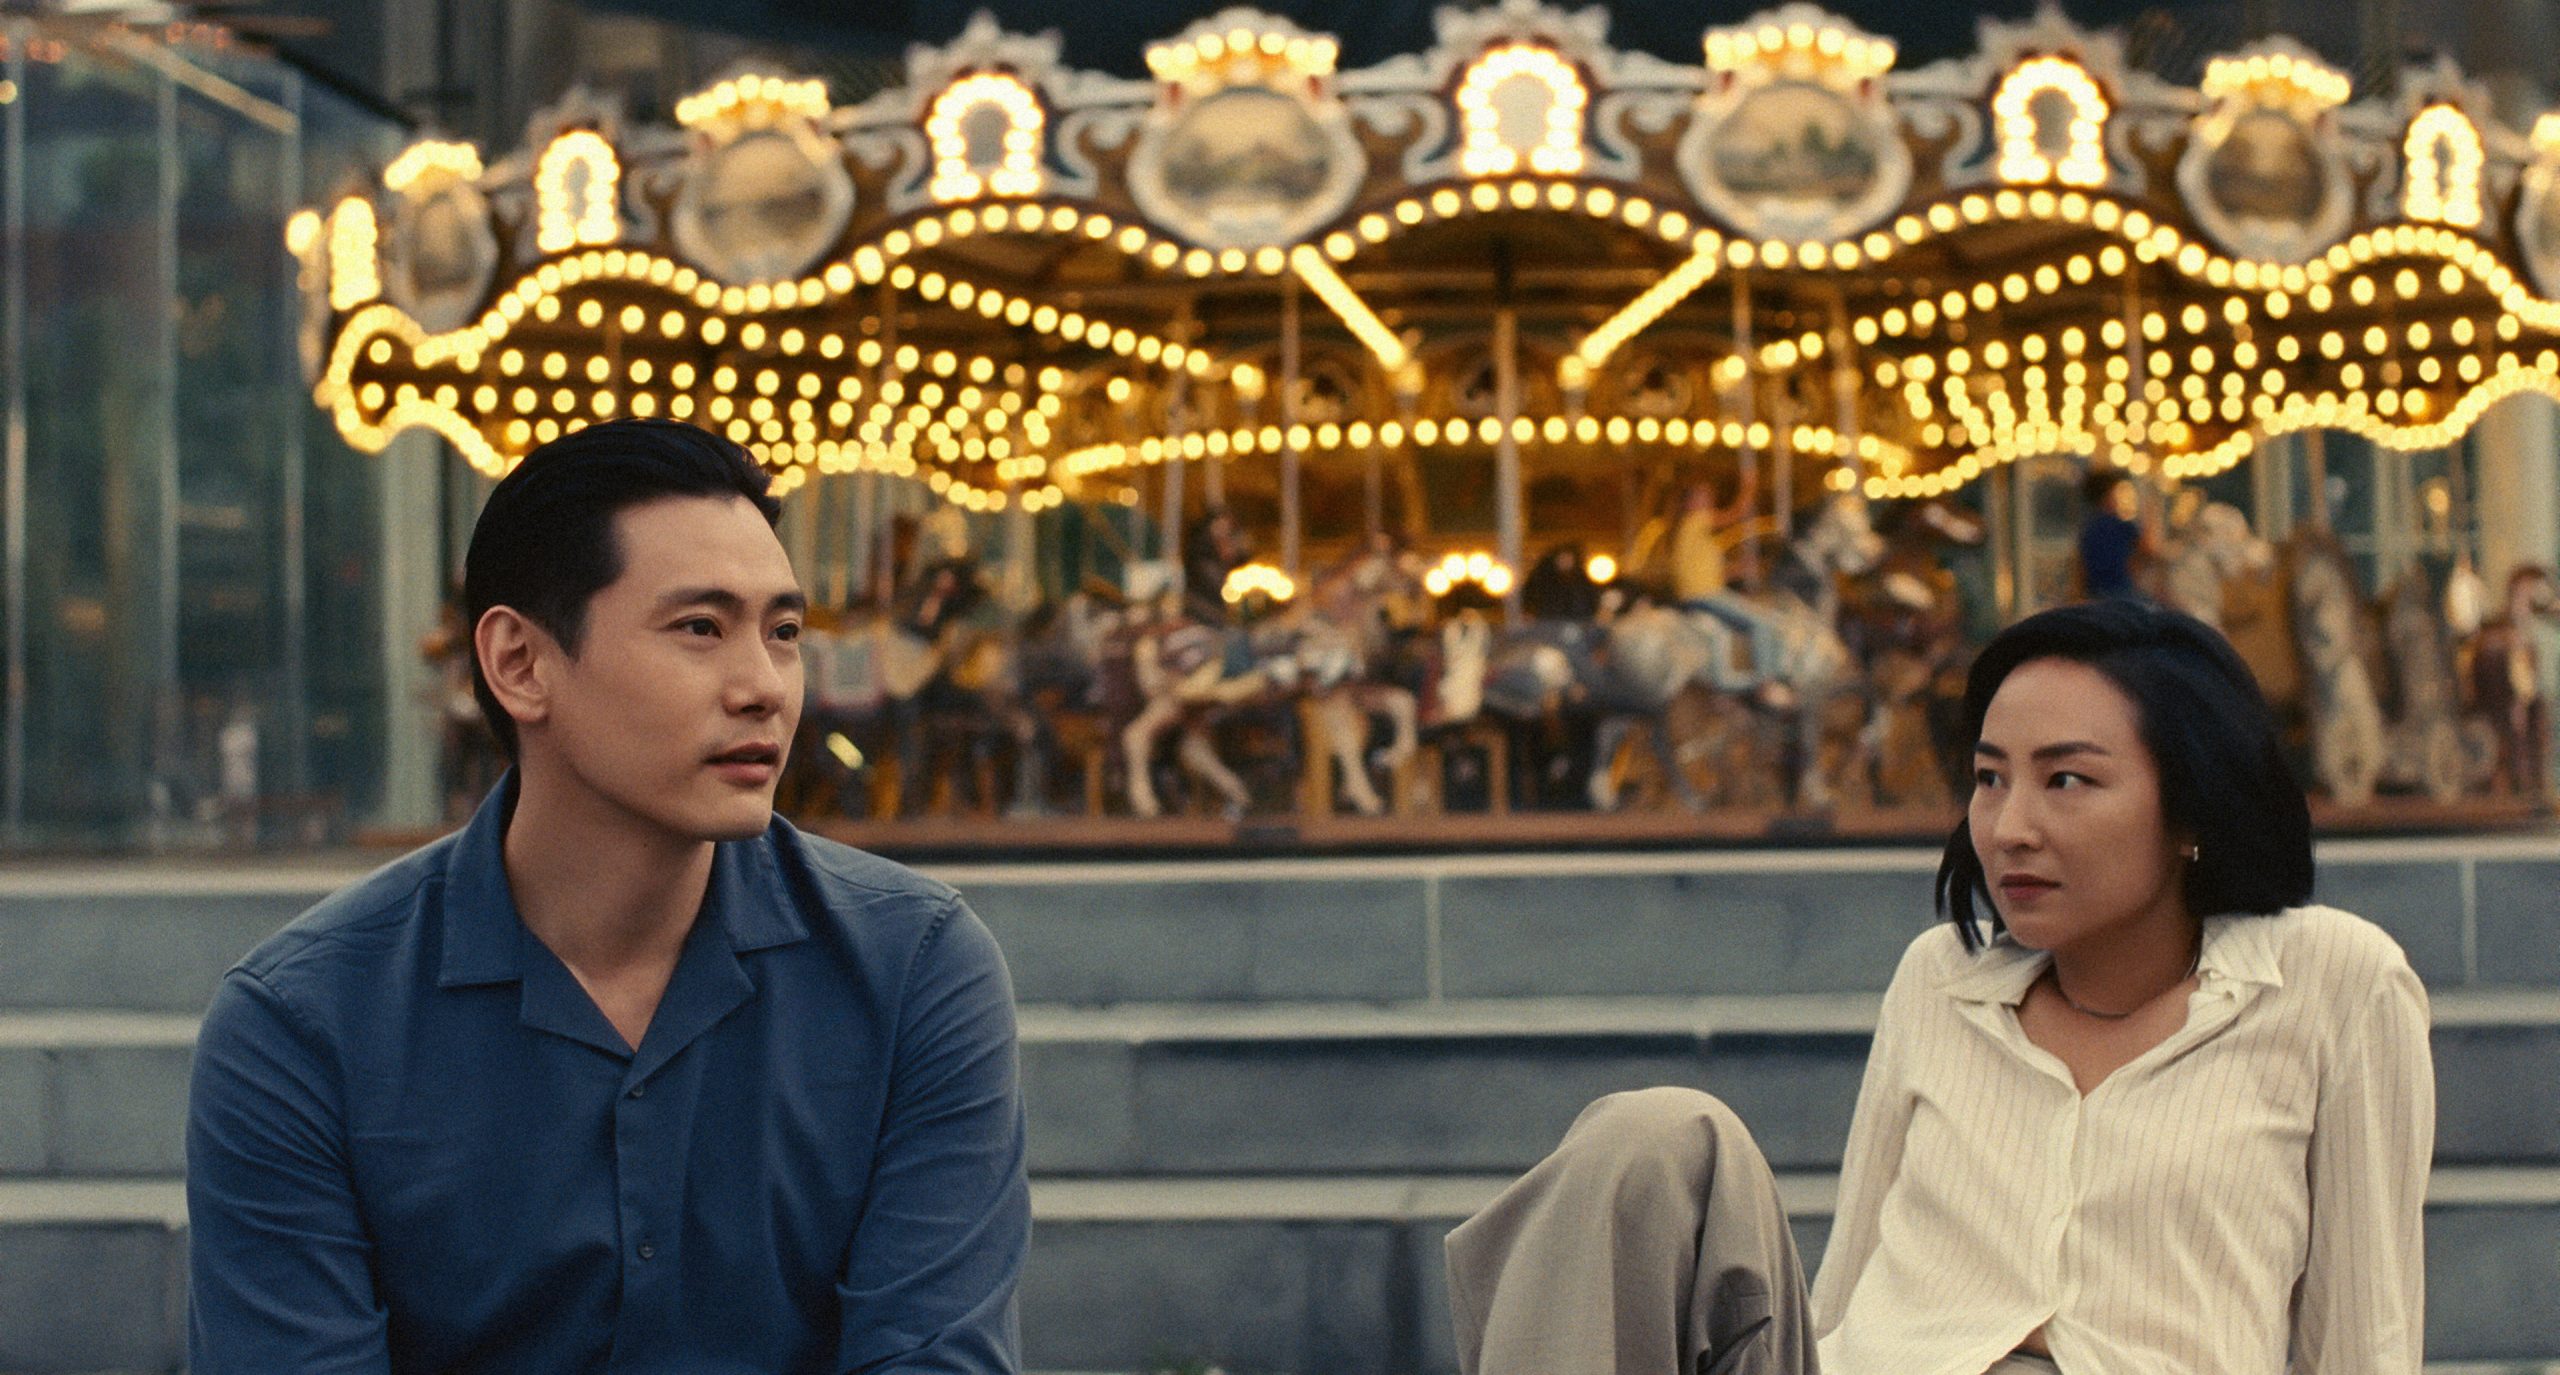 A man and a woman sit in front of a fairground carousel looking at each other.